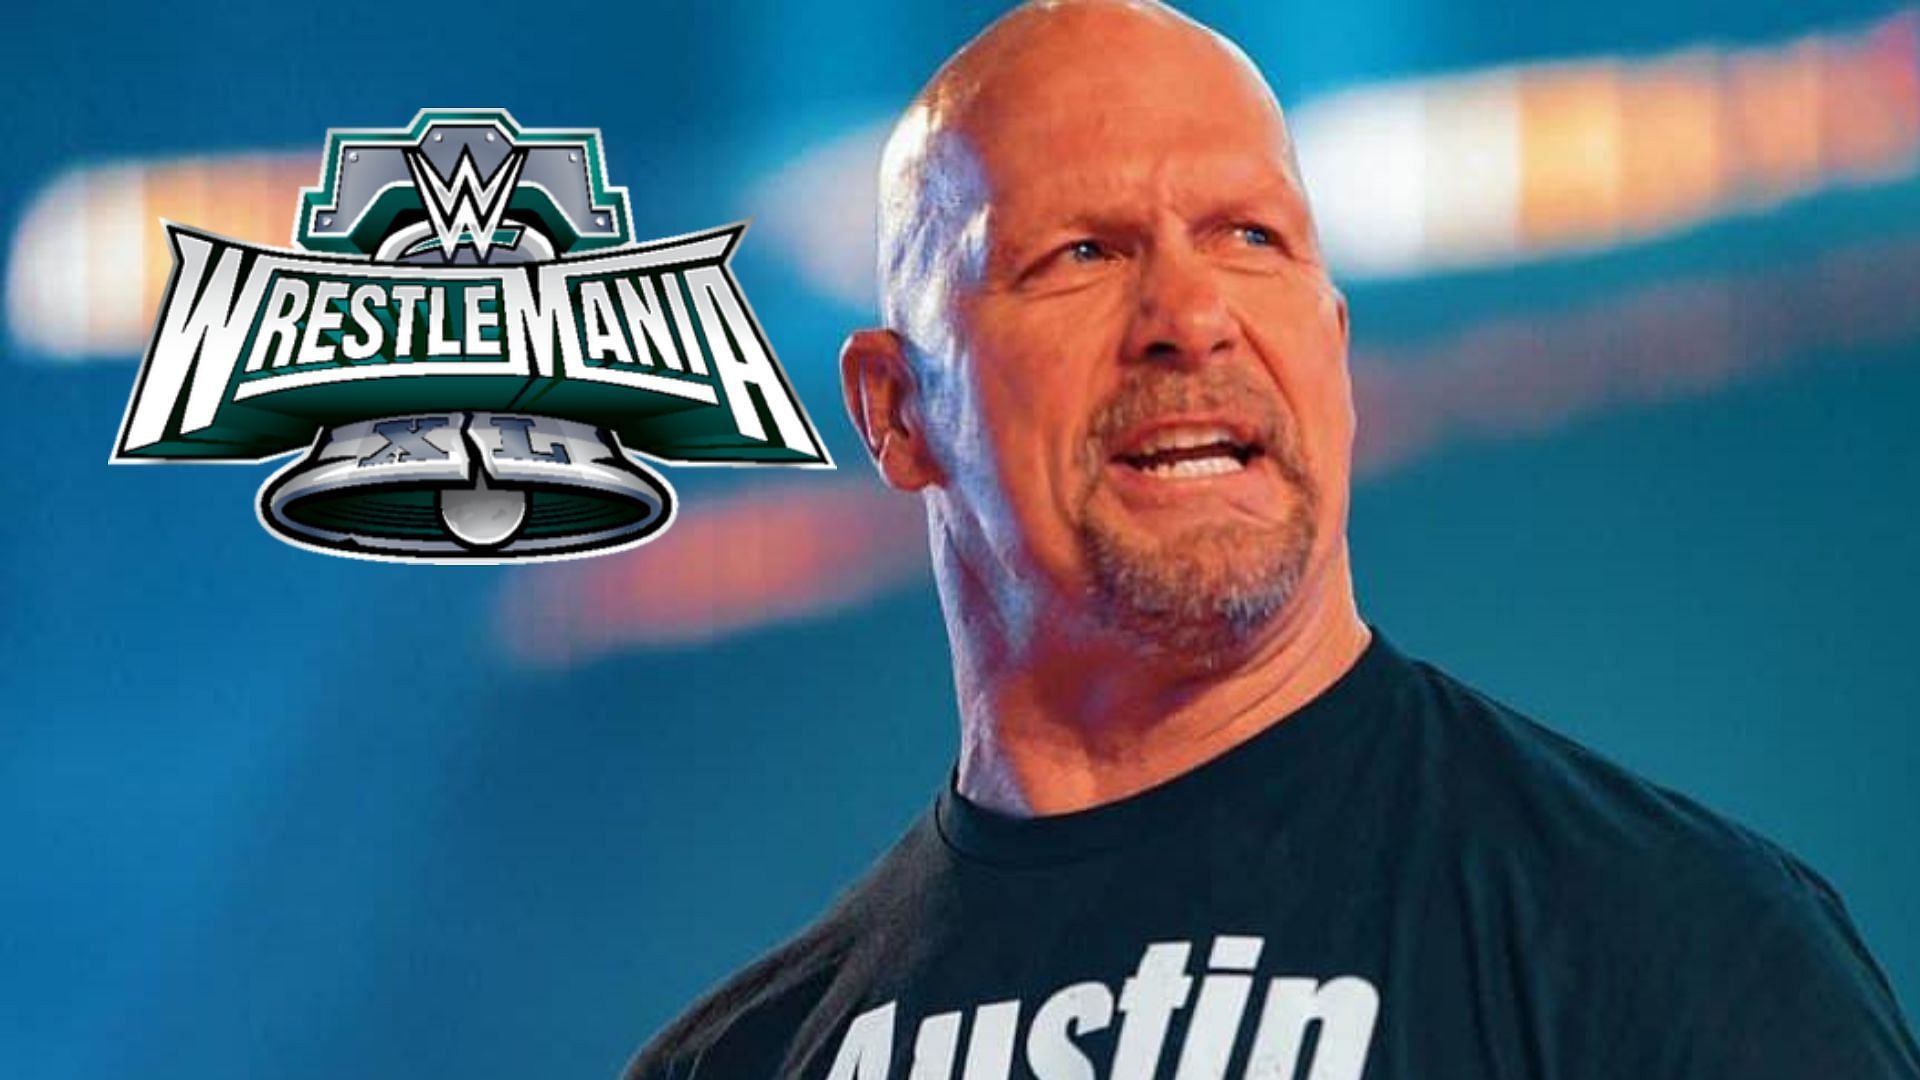 2time WWE Champion could force Stone Cold Steve Austin to come out of